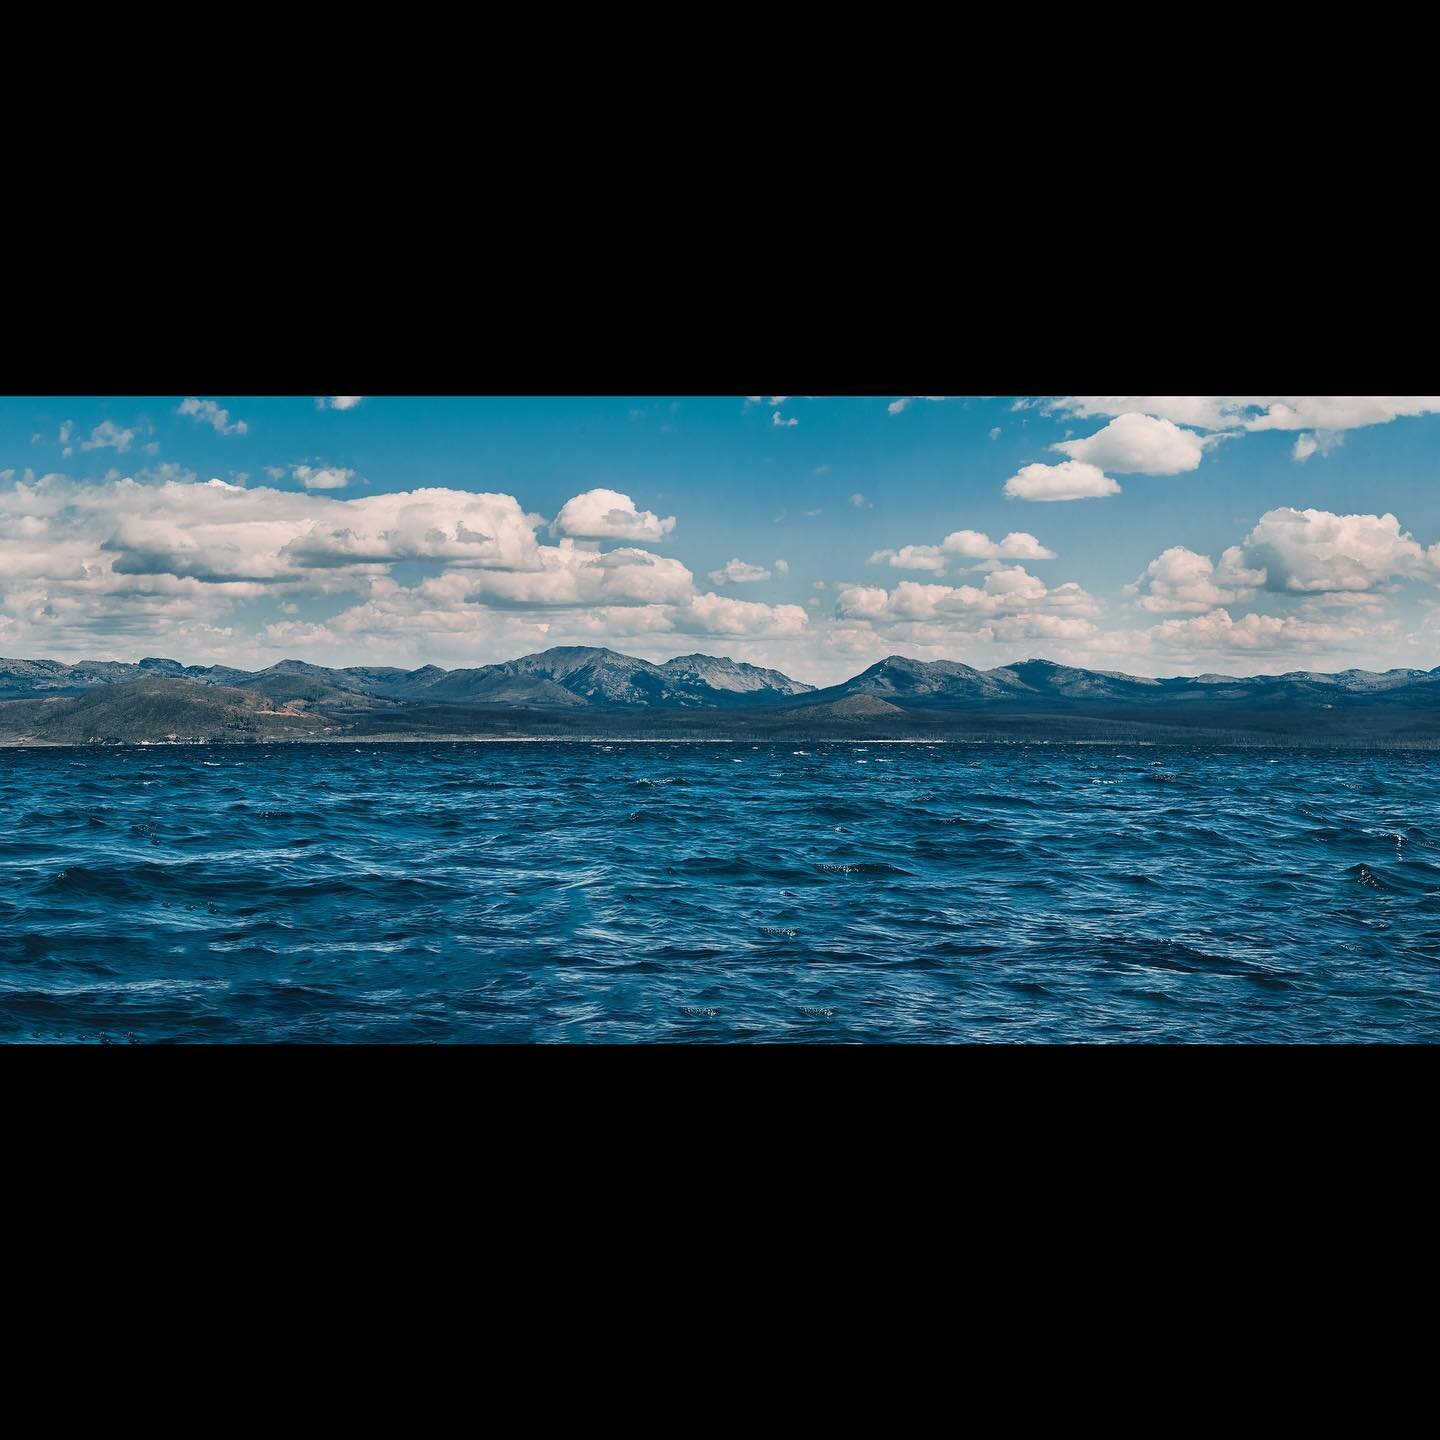 The serene view of Yellowstone Lake always lets me breathe a little easier&hellip; #pano #panoramic #yellowstonenationalpark #yellowstonelake #yelllwstone #wyoming #landscapephotography #photography #travel #beauty #nature #mountains #water #lake